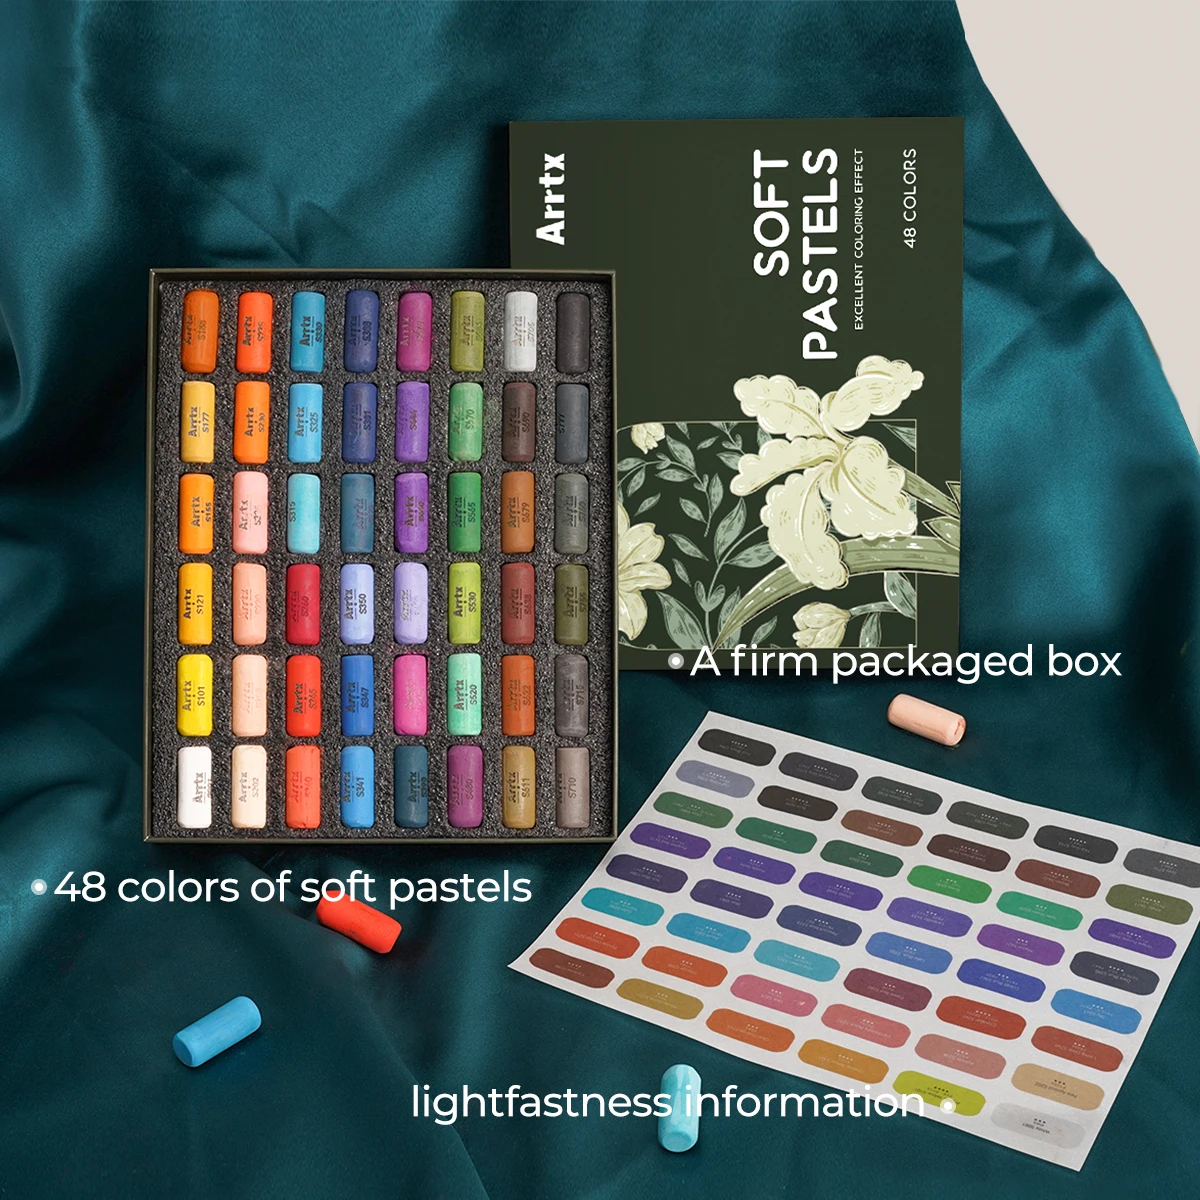 Arrtx 48 Colors Painting Crayons Soft Pastel Art Drawing Set Non